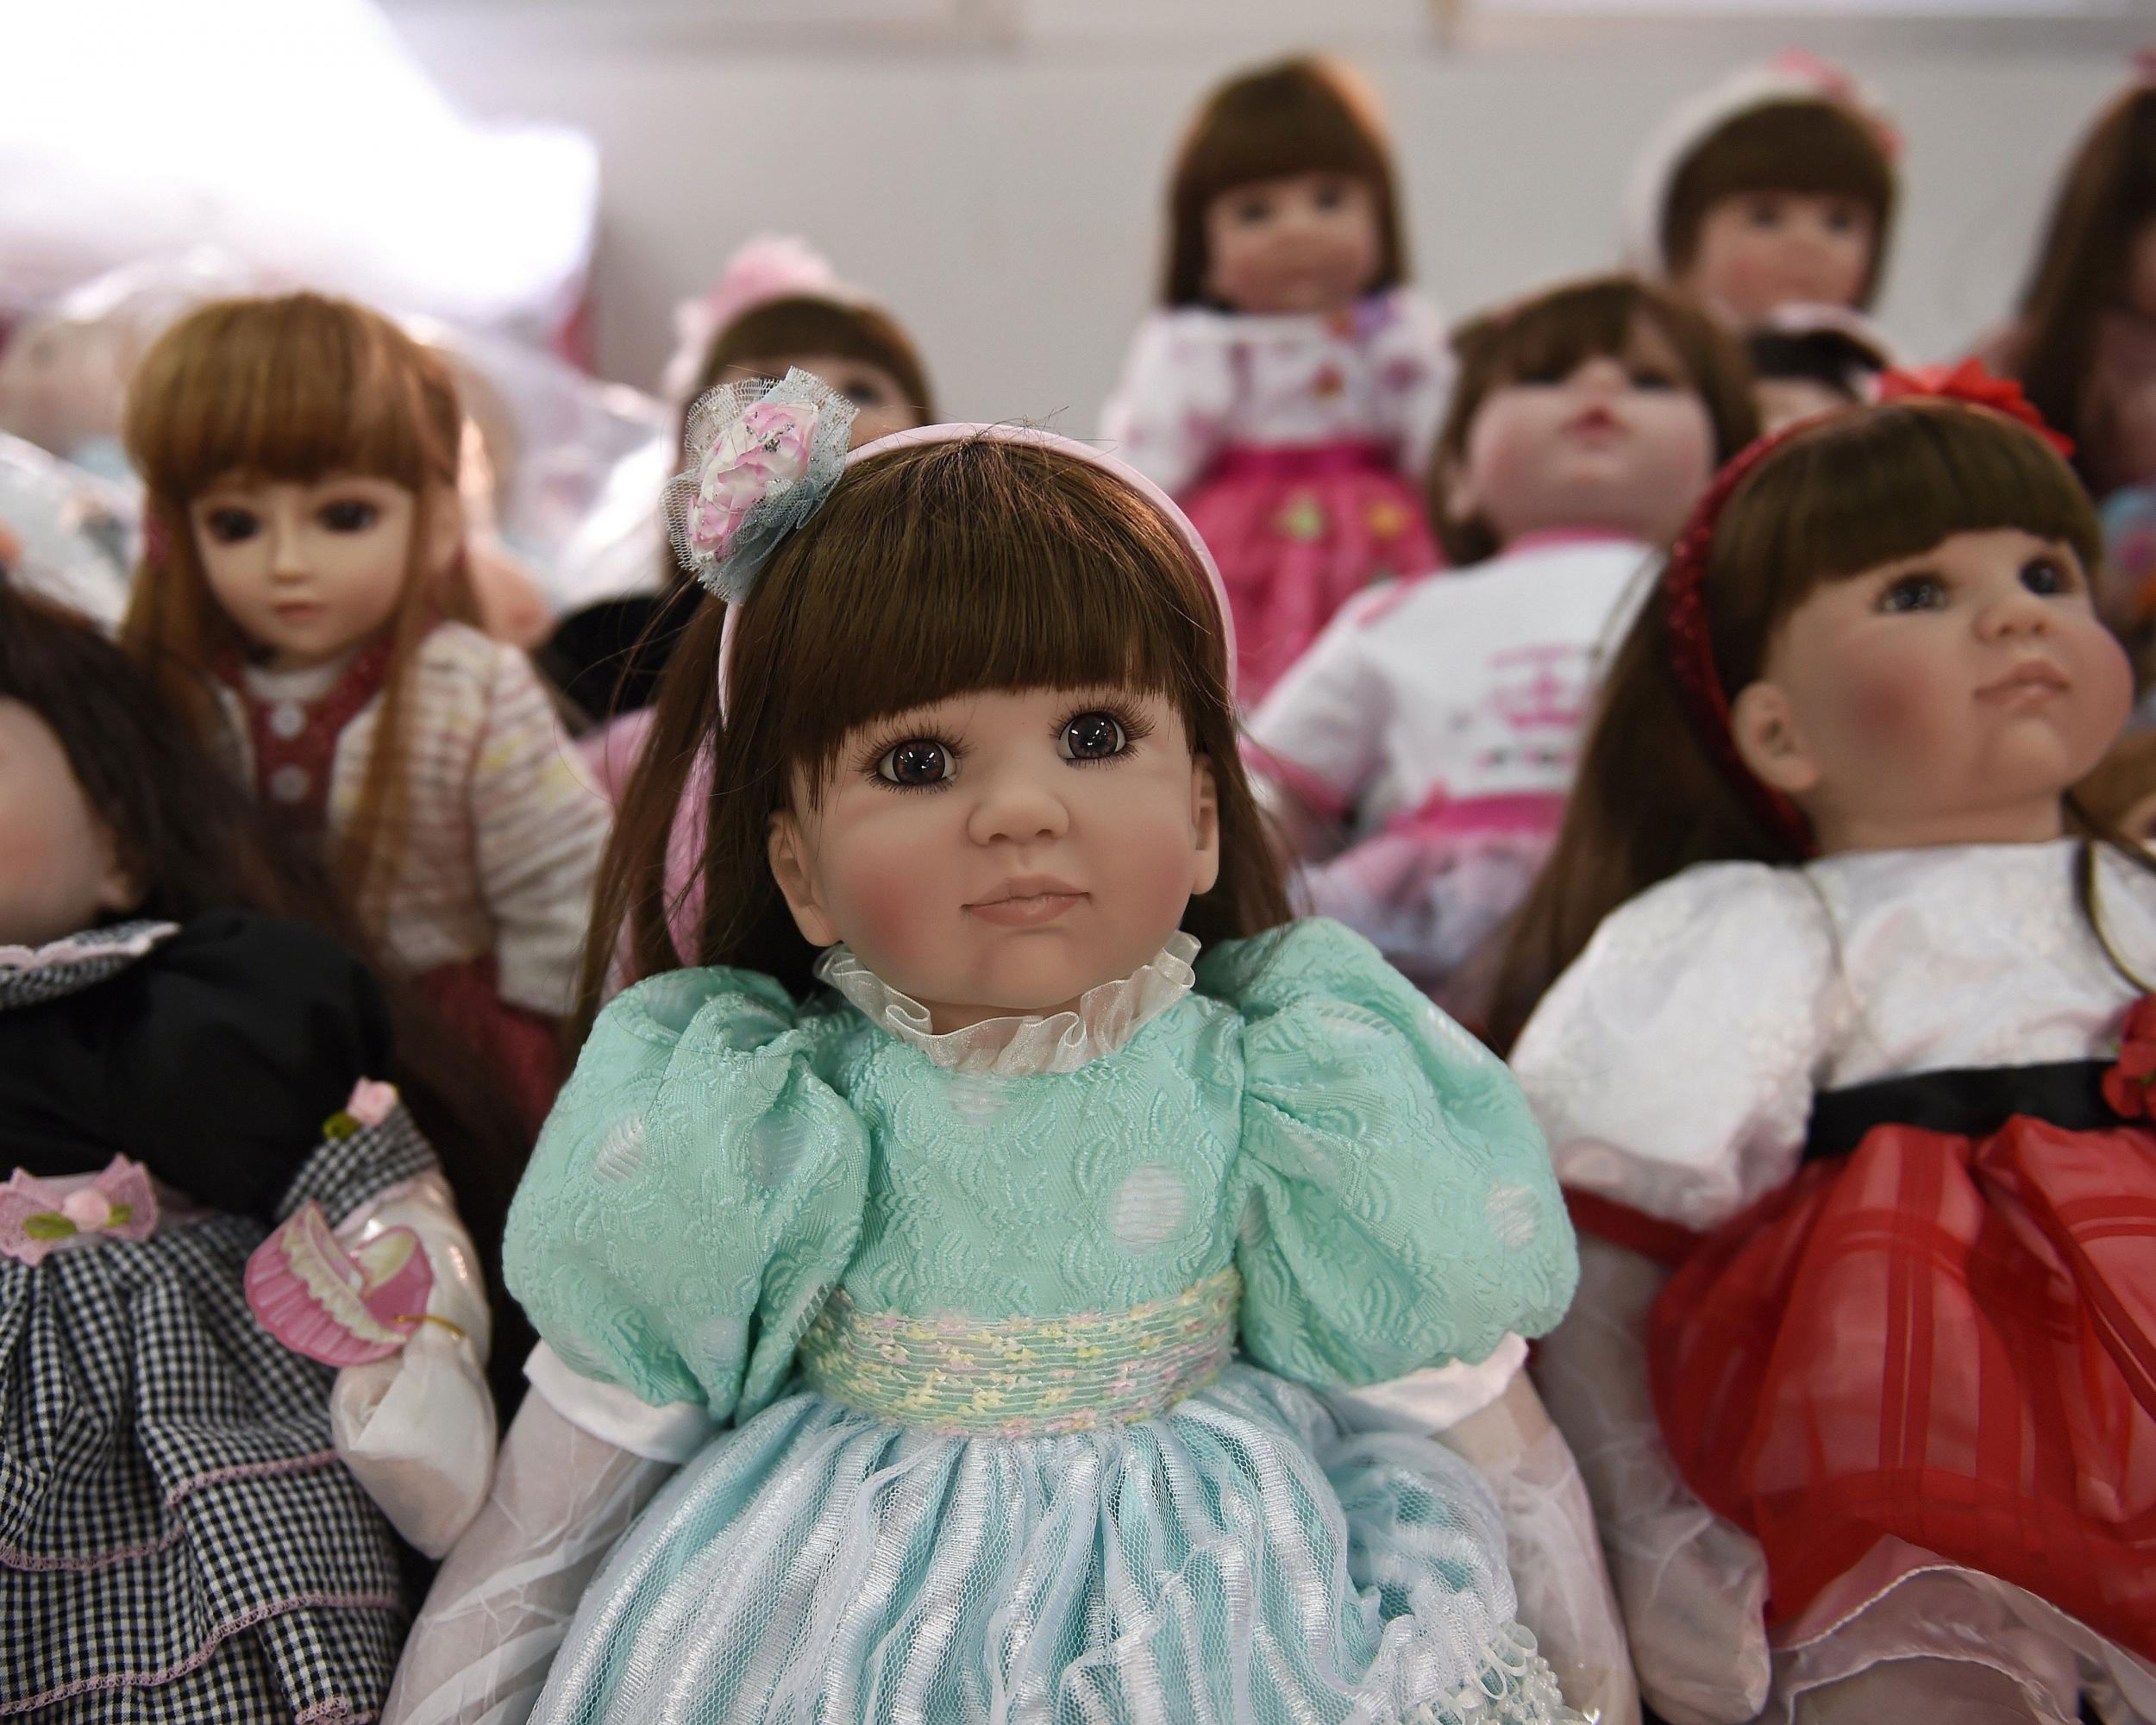 Popular 'Look Thep' dolls, said to be possessed with children's souls